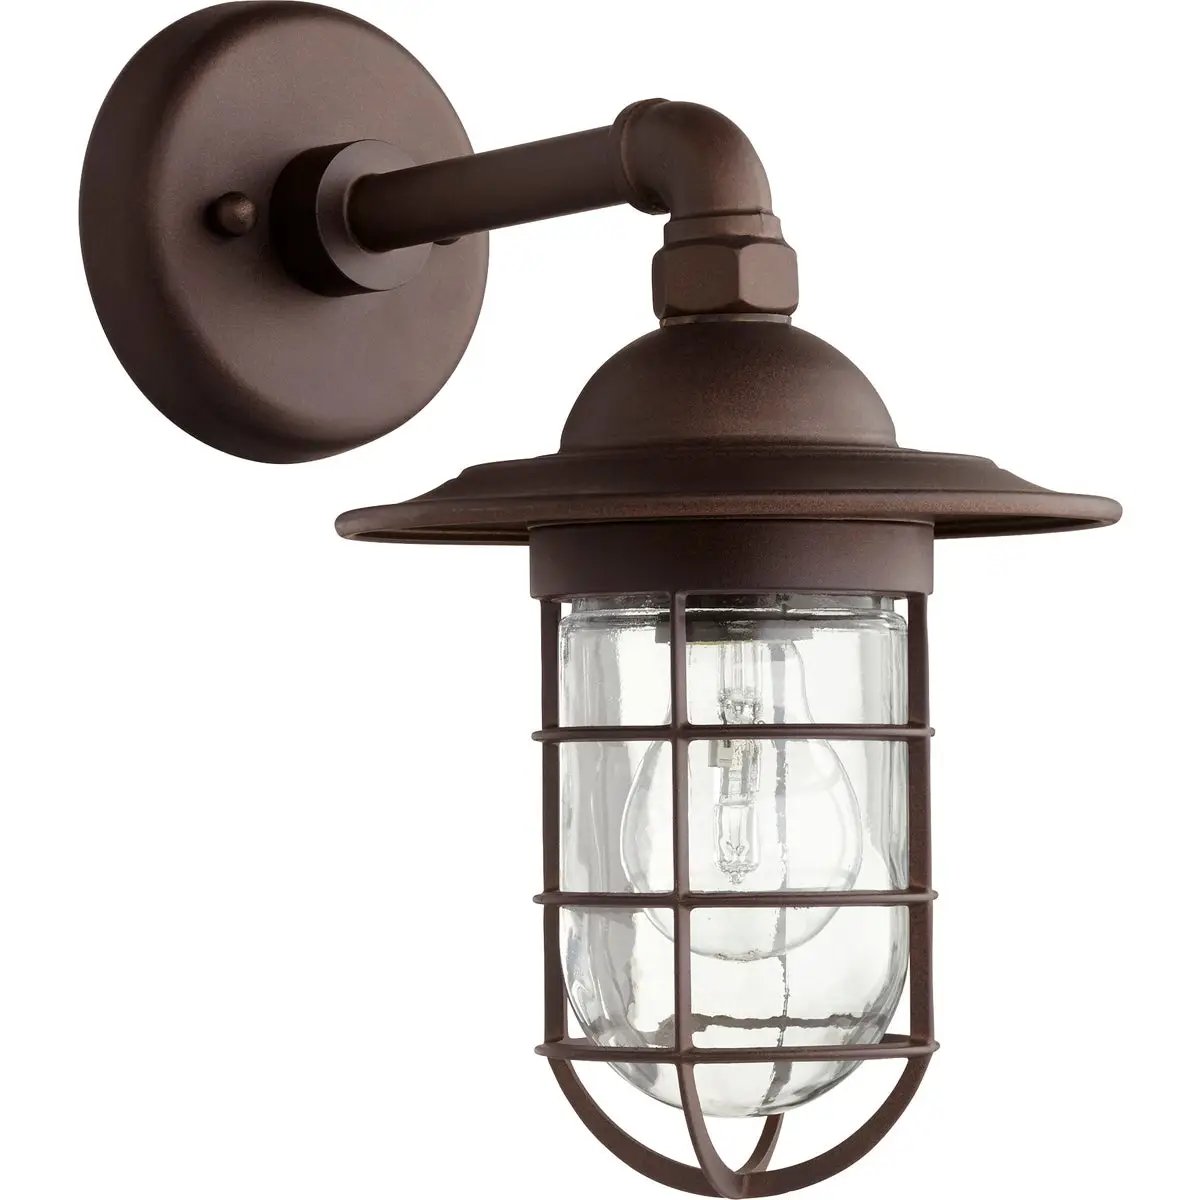 Coastal Outdoor Wall Light with Clear Glass Shade, perfect for coastal and rustic outdoor settings. Adds exceptional style and welcoming light to home exteriors. Fits in front or back entryway, garage door. 7.5"W x 12.25"H x 12"E. 60W, 120V, Medium E26 base. UL Listed, Wet Location. 2-year warranty.